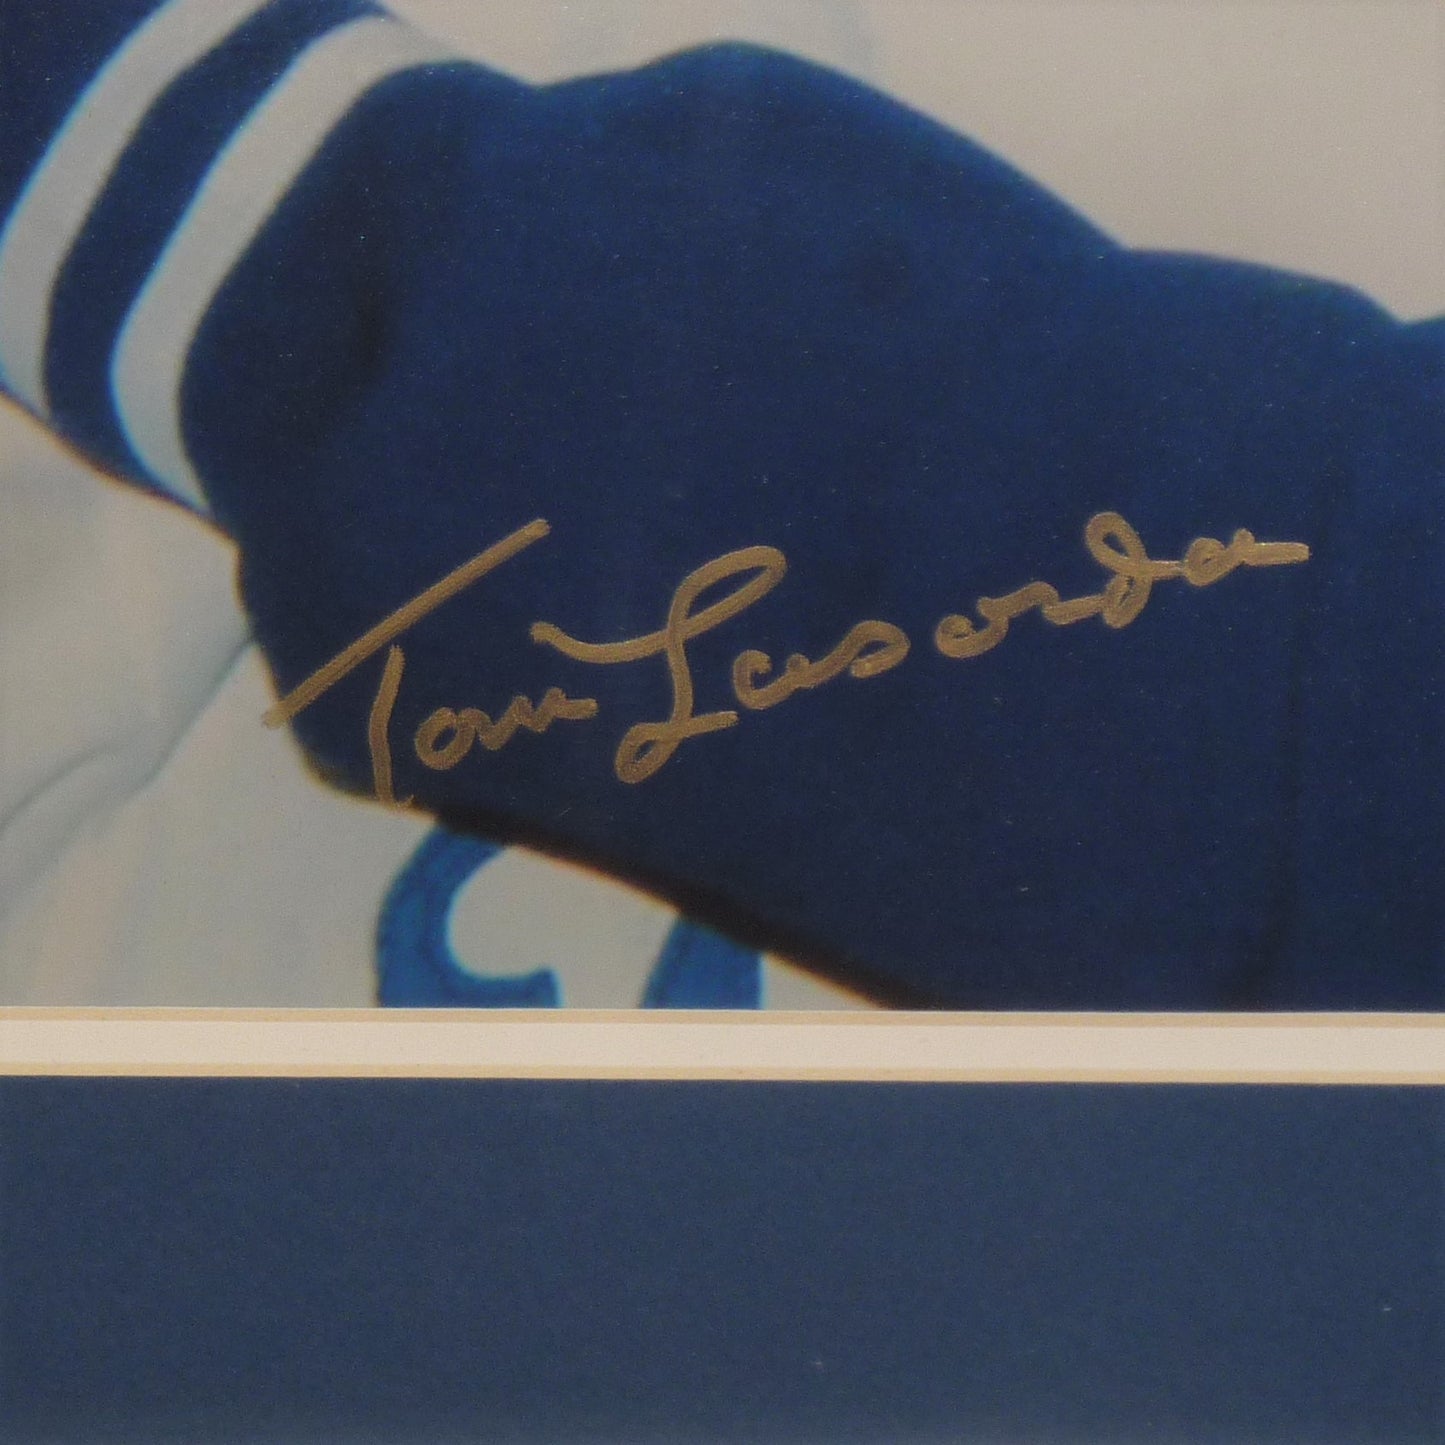 Tommy Lasorda Autographed Los Angeles Dodgers (With Frank Sinatra) Deluxe Framed 16x20 Photo - PSADNA